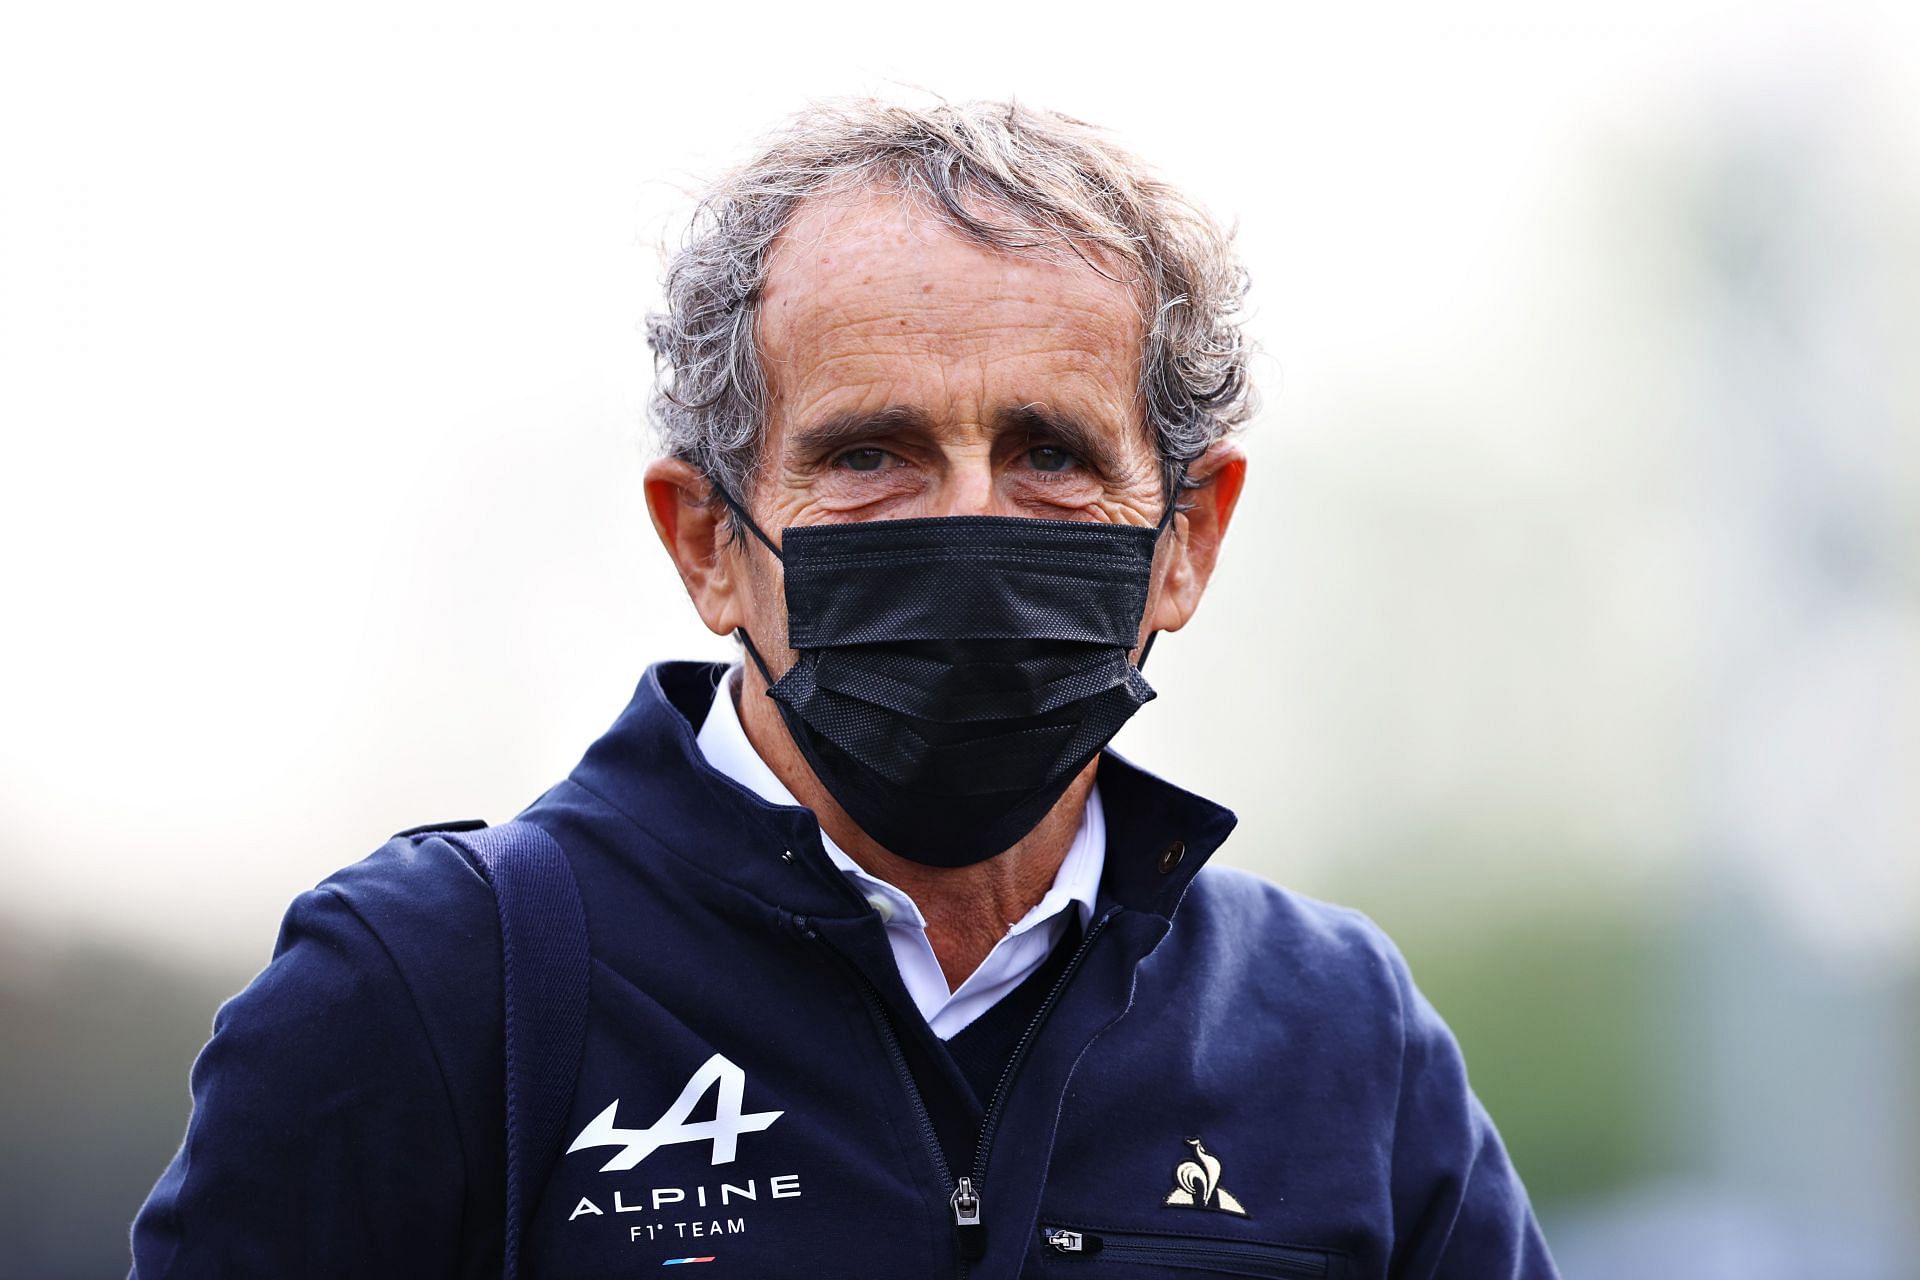 Alain Prost, Special Advisor to Alpine F1 Team walks in the Paddock in Italy. (Photo by Bryn Lennon/Getty Images)Enter caption